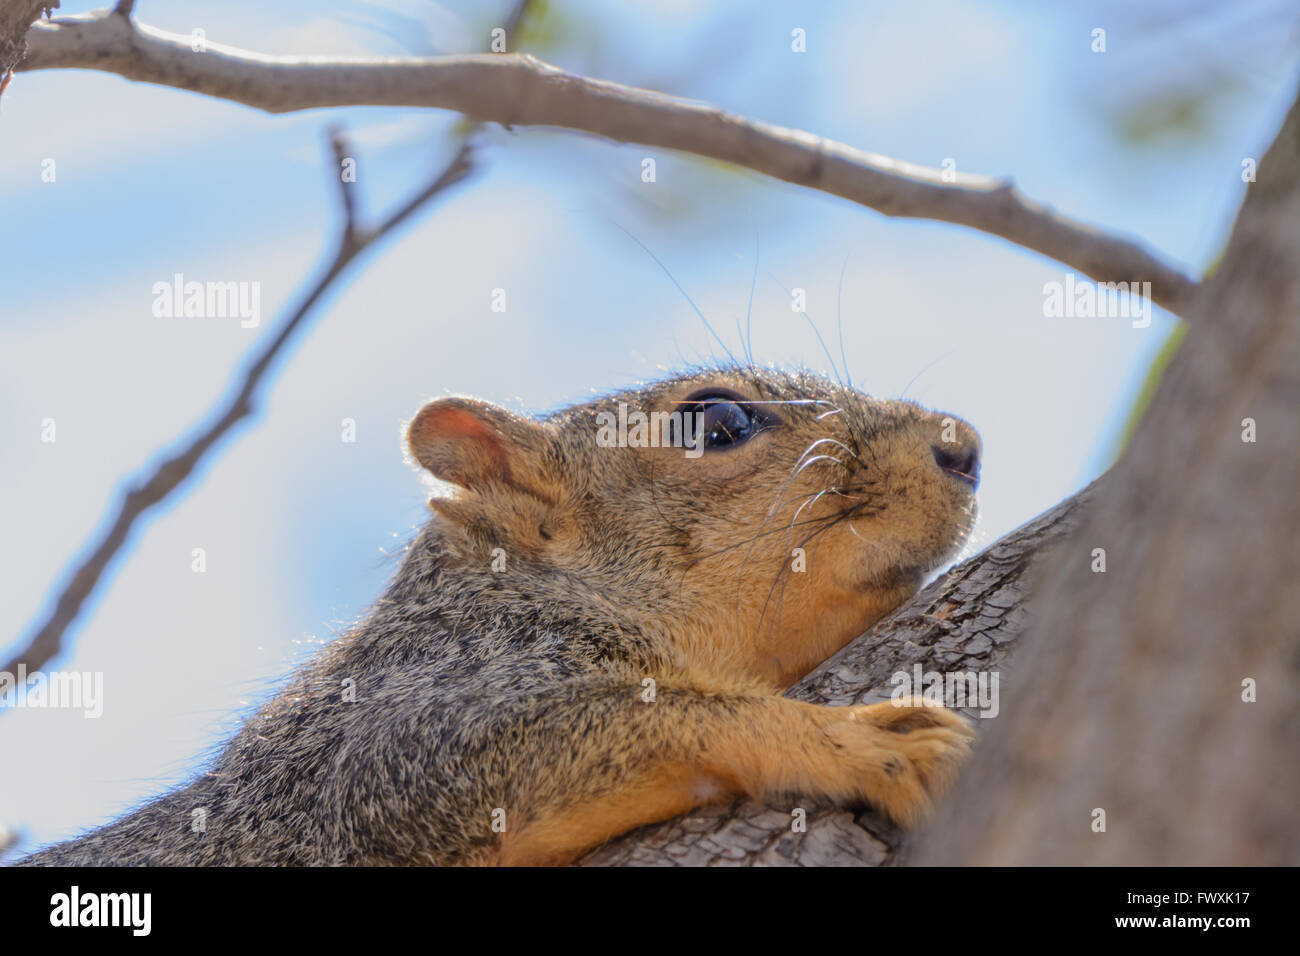 Squirrel Clinging To Tree Branch -- Closeup, Bright eyes looking upward blue sky background Stock Photo